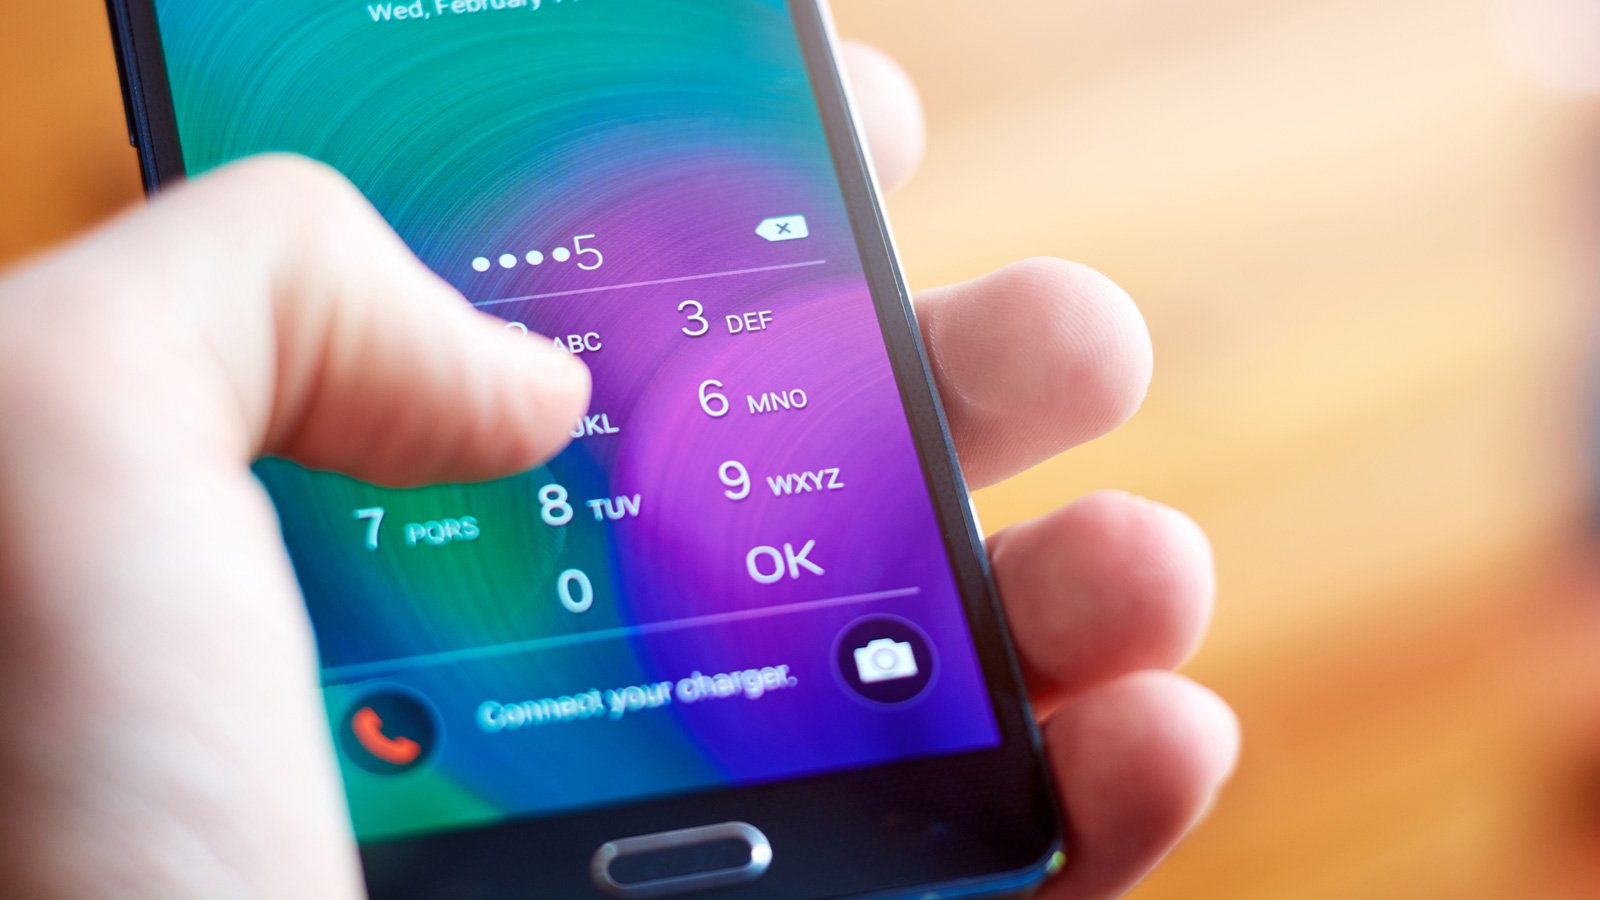 Android phone owner accidentally finds a way to bypass lock screen